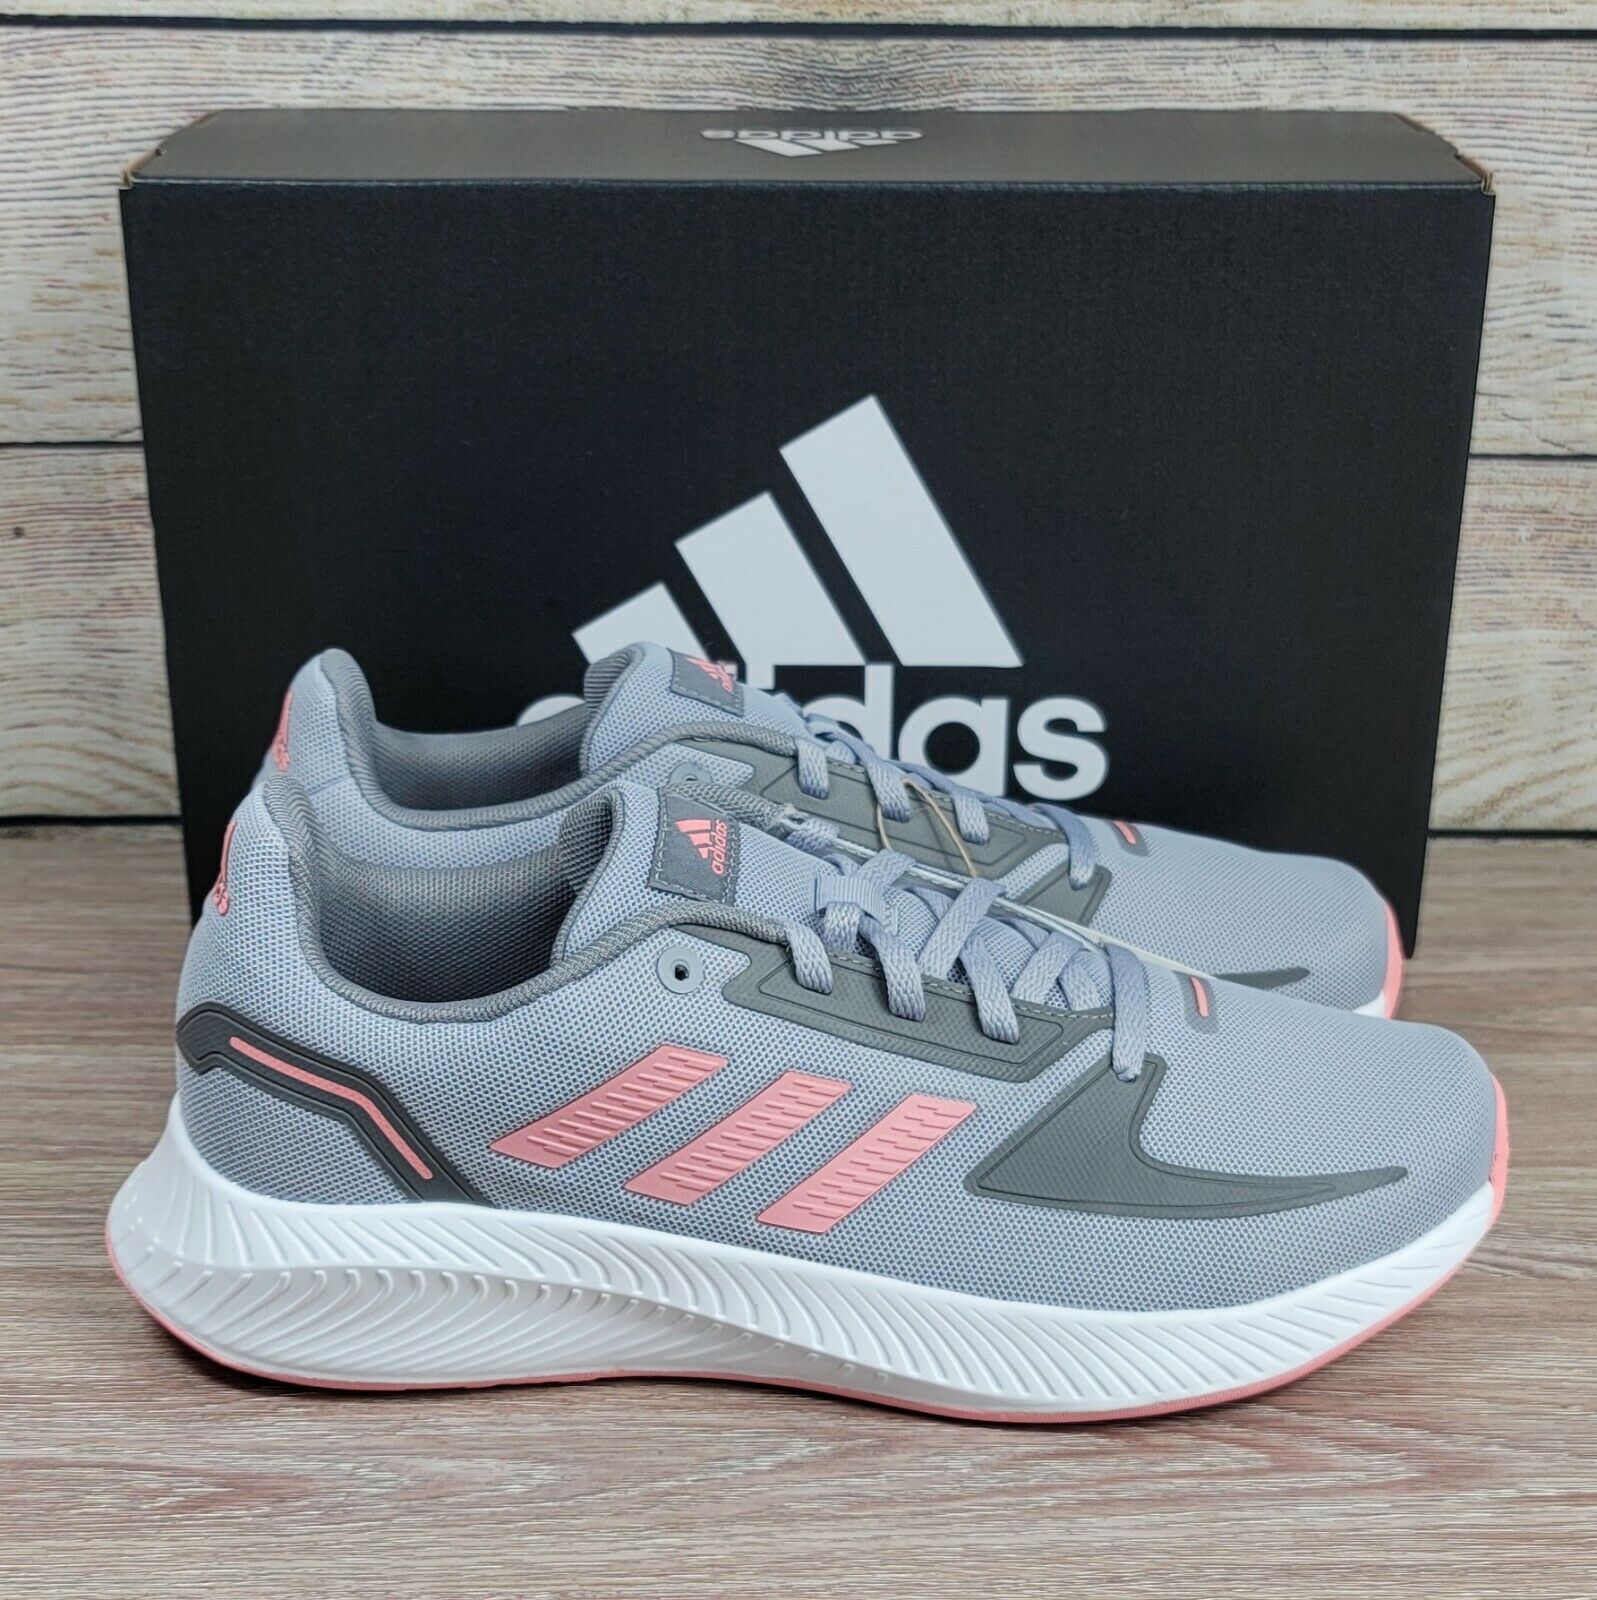 Adidas Women's Running Athletic Training Shoes Size 8.5 Grey/Pink Falcon Workout